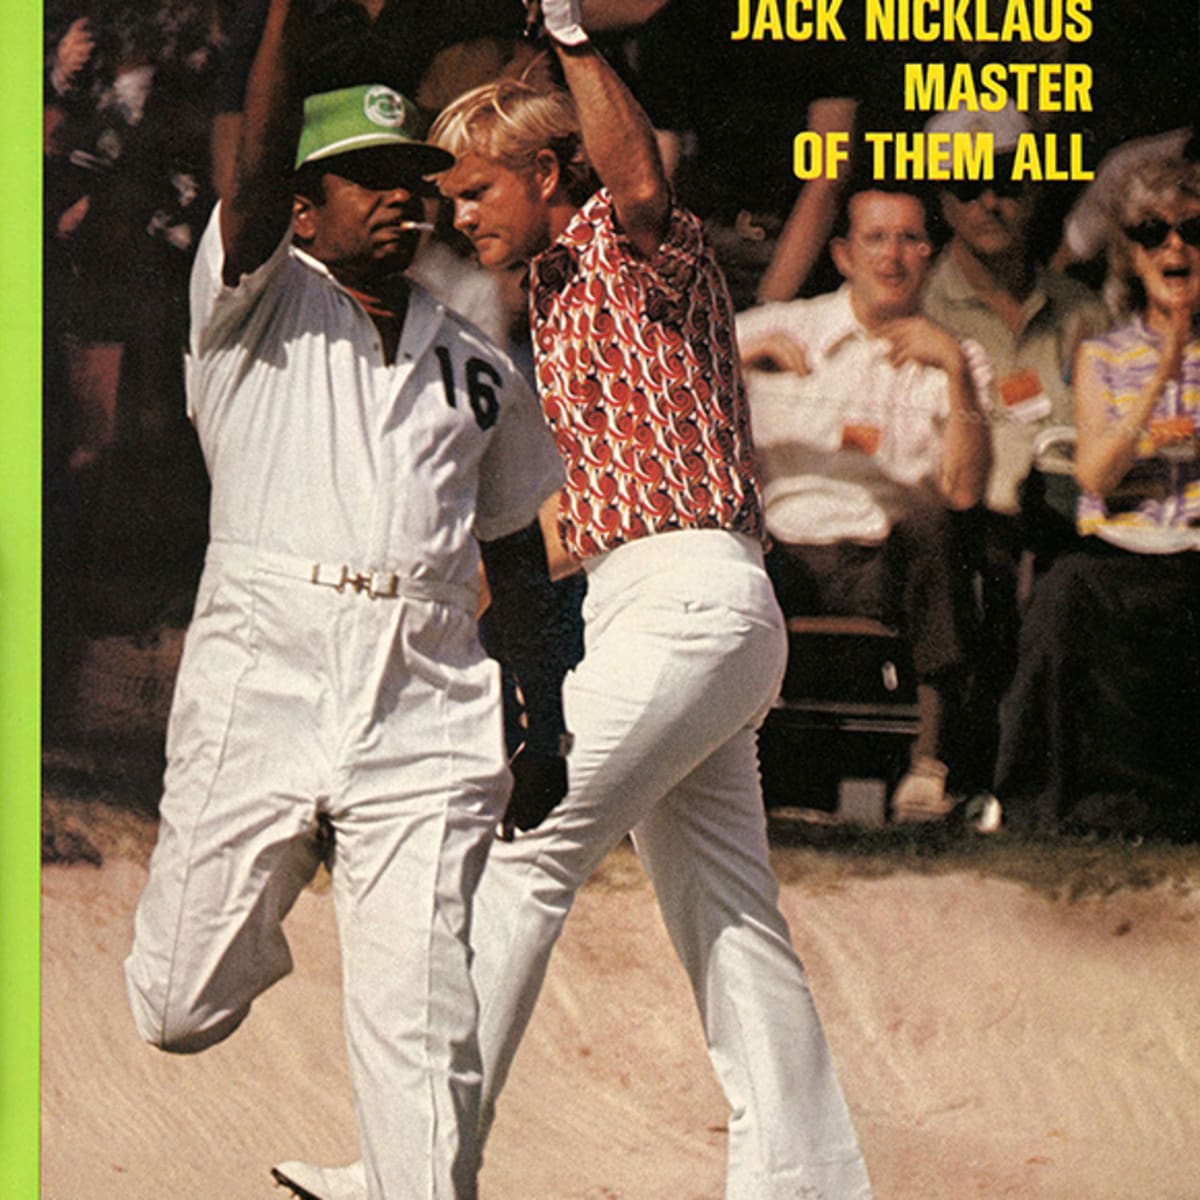 April 17, 1972 Table Of Contents - Sports Illustrated Vault